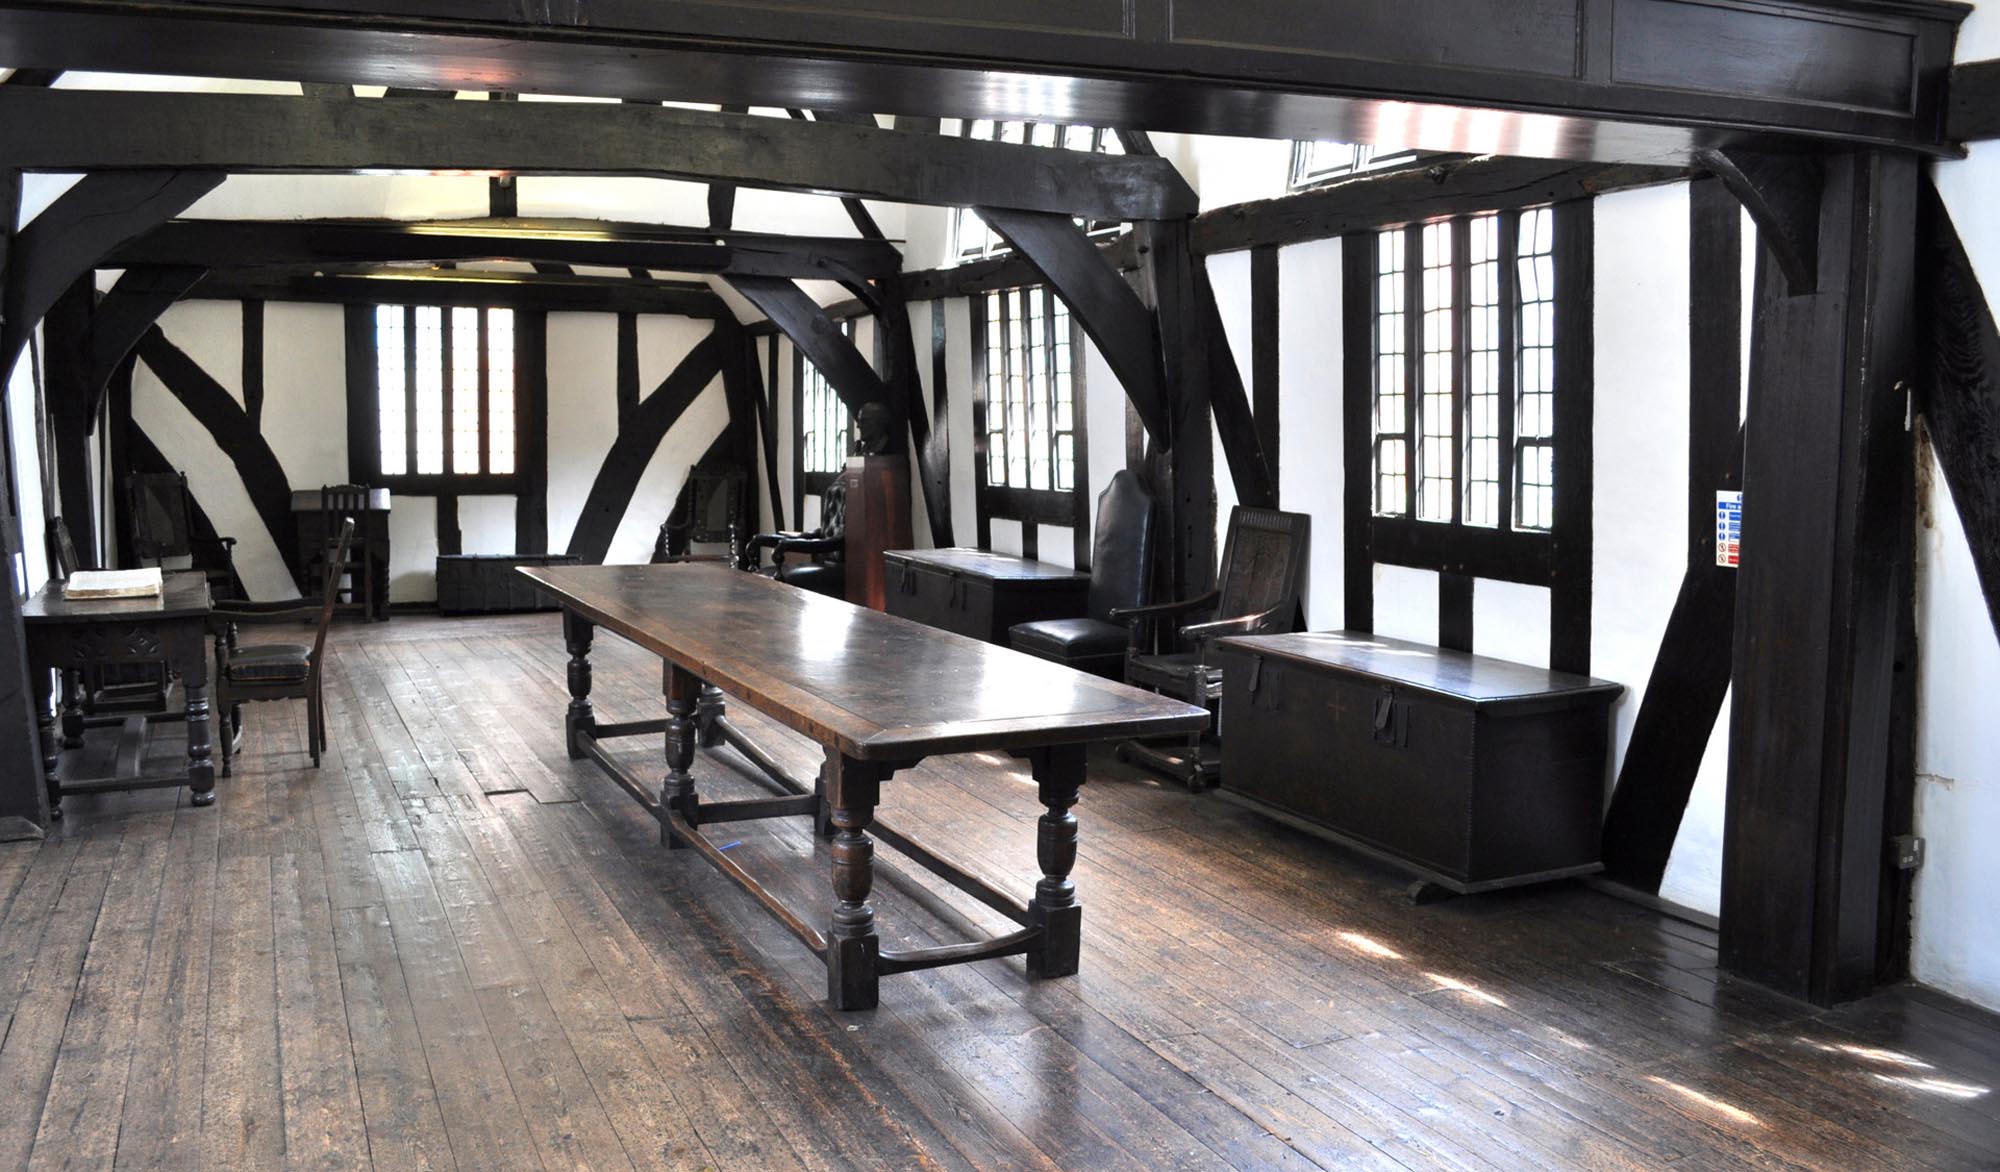 Leicester Guildhall Library